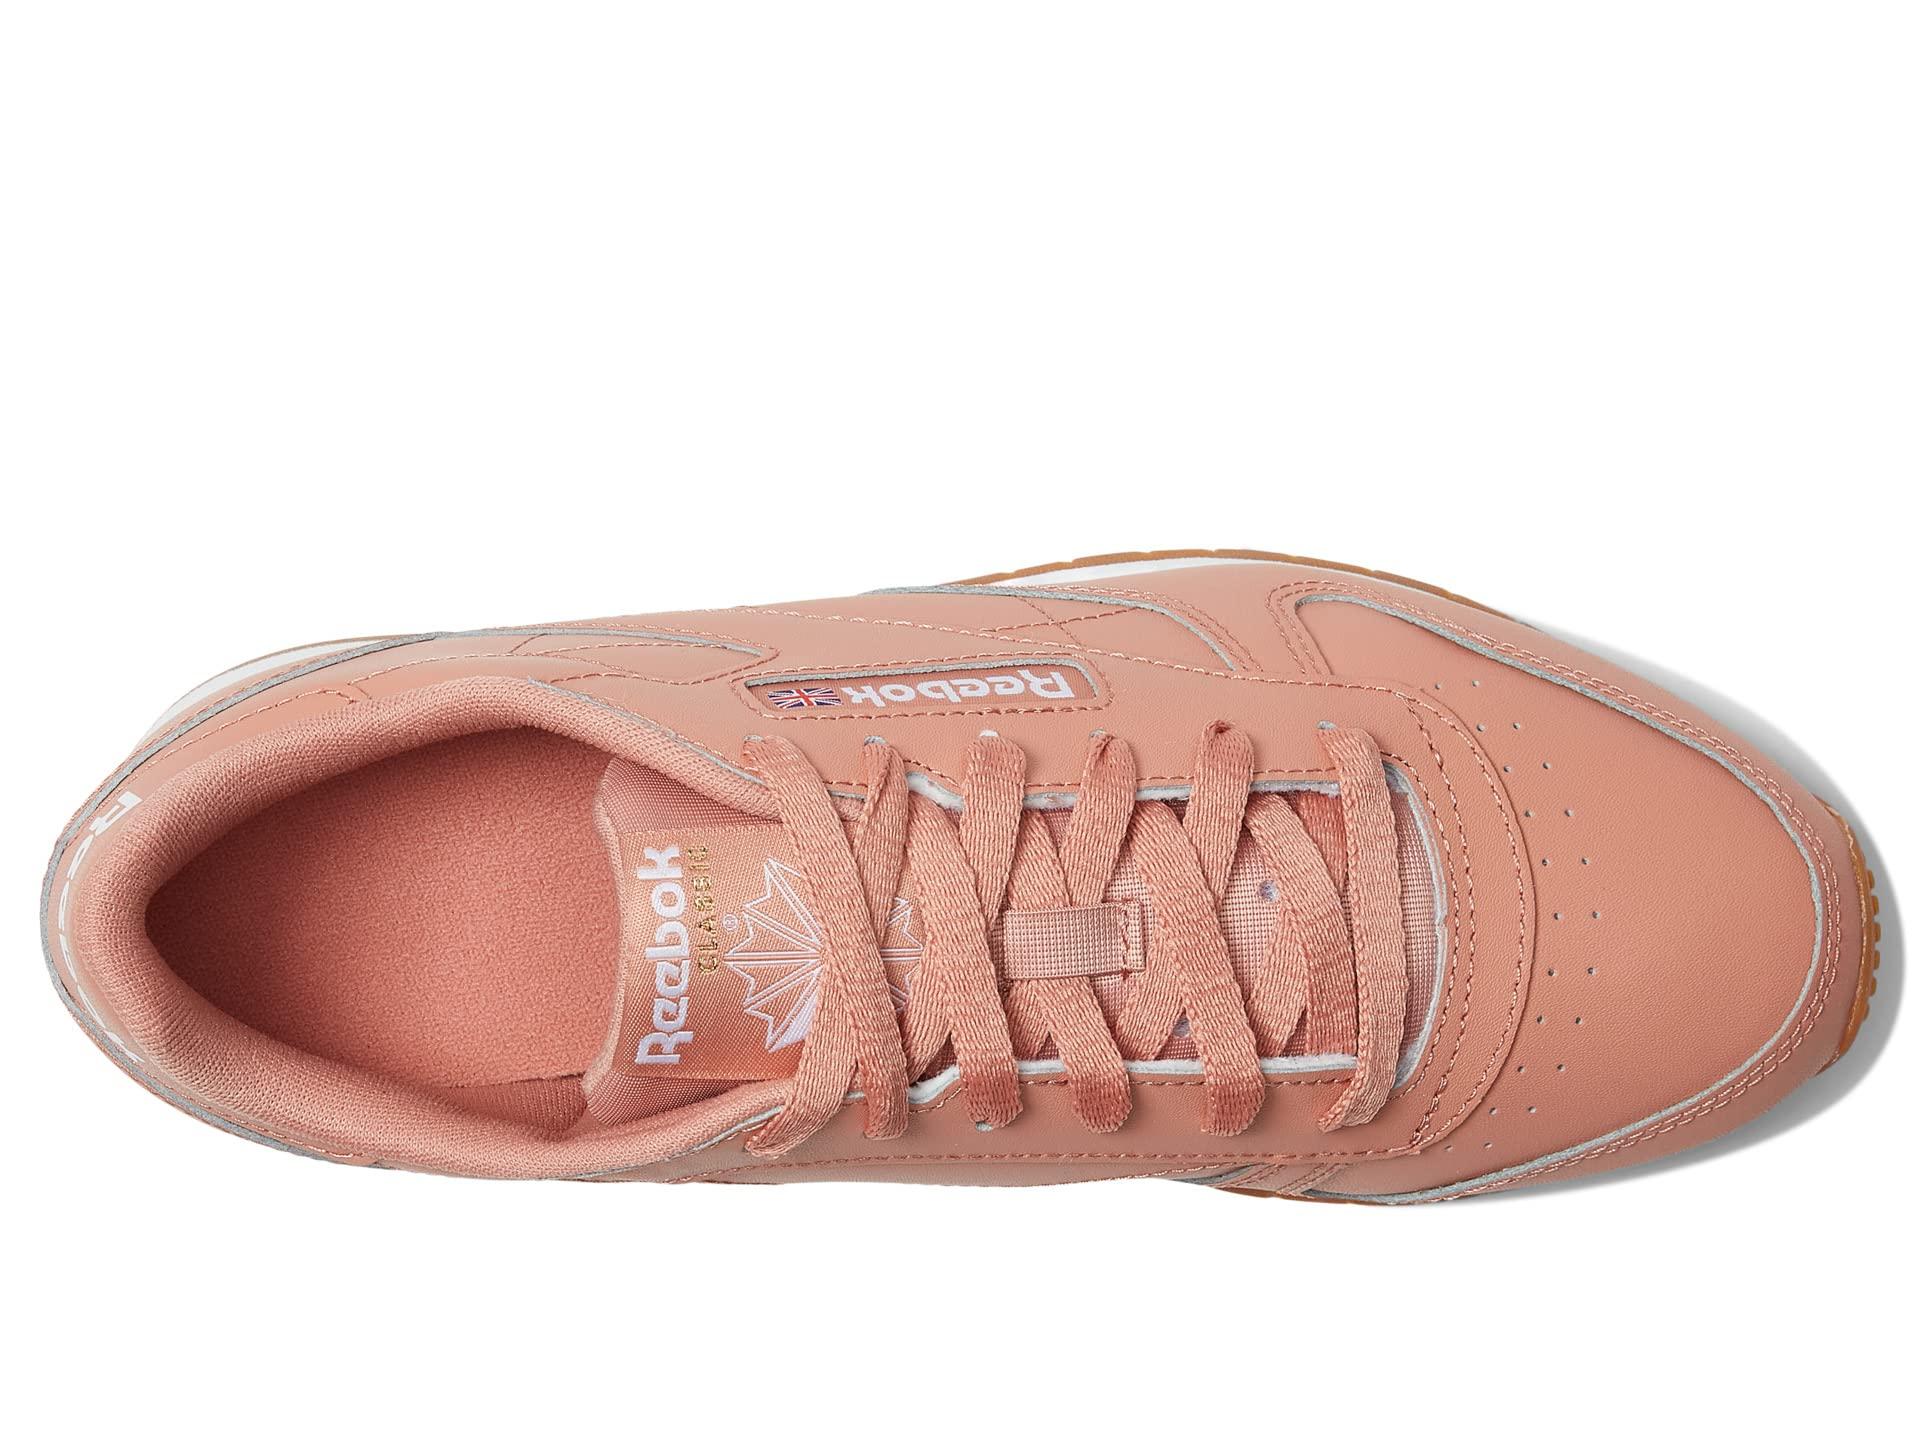 Reebok Classic Leather in Coral (Pink) - Save 46% | Lyst